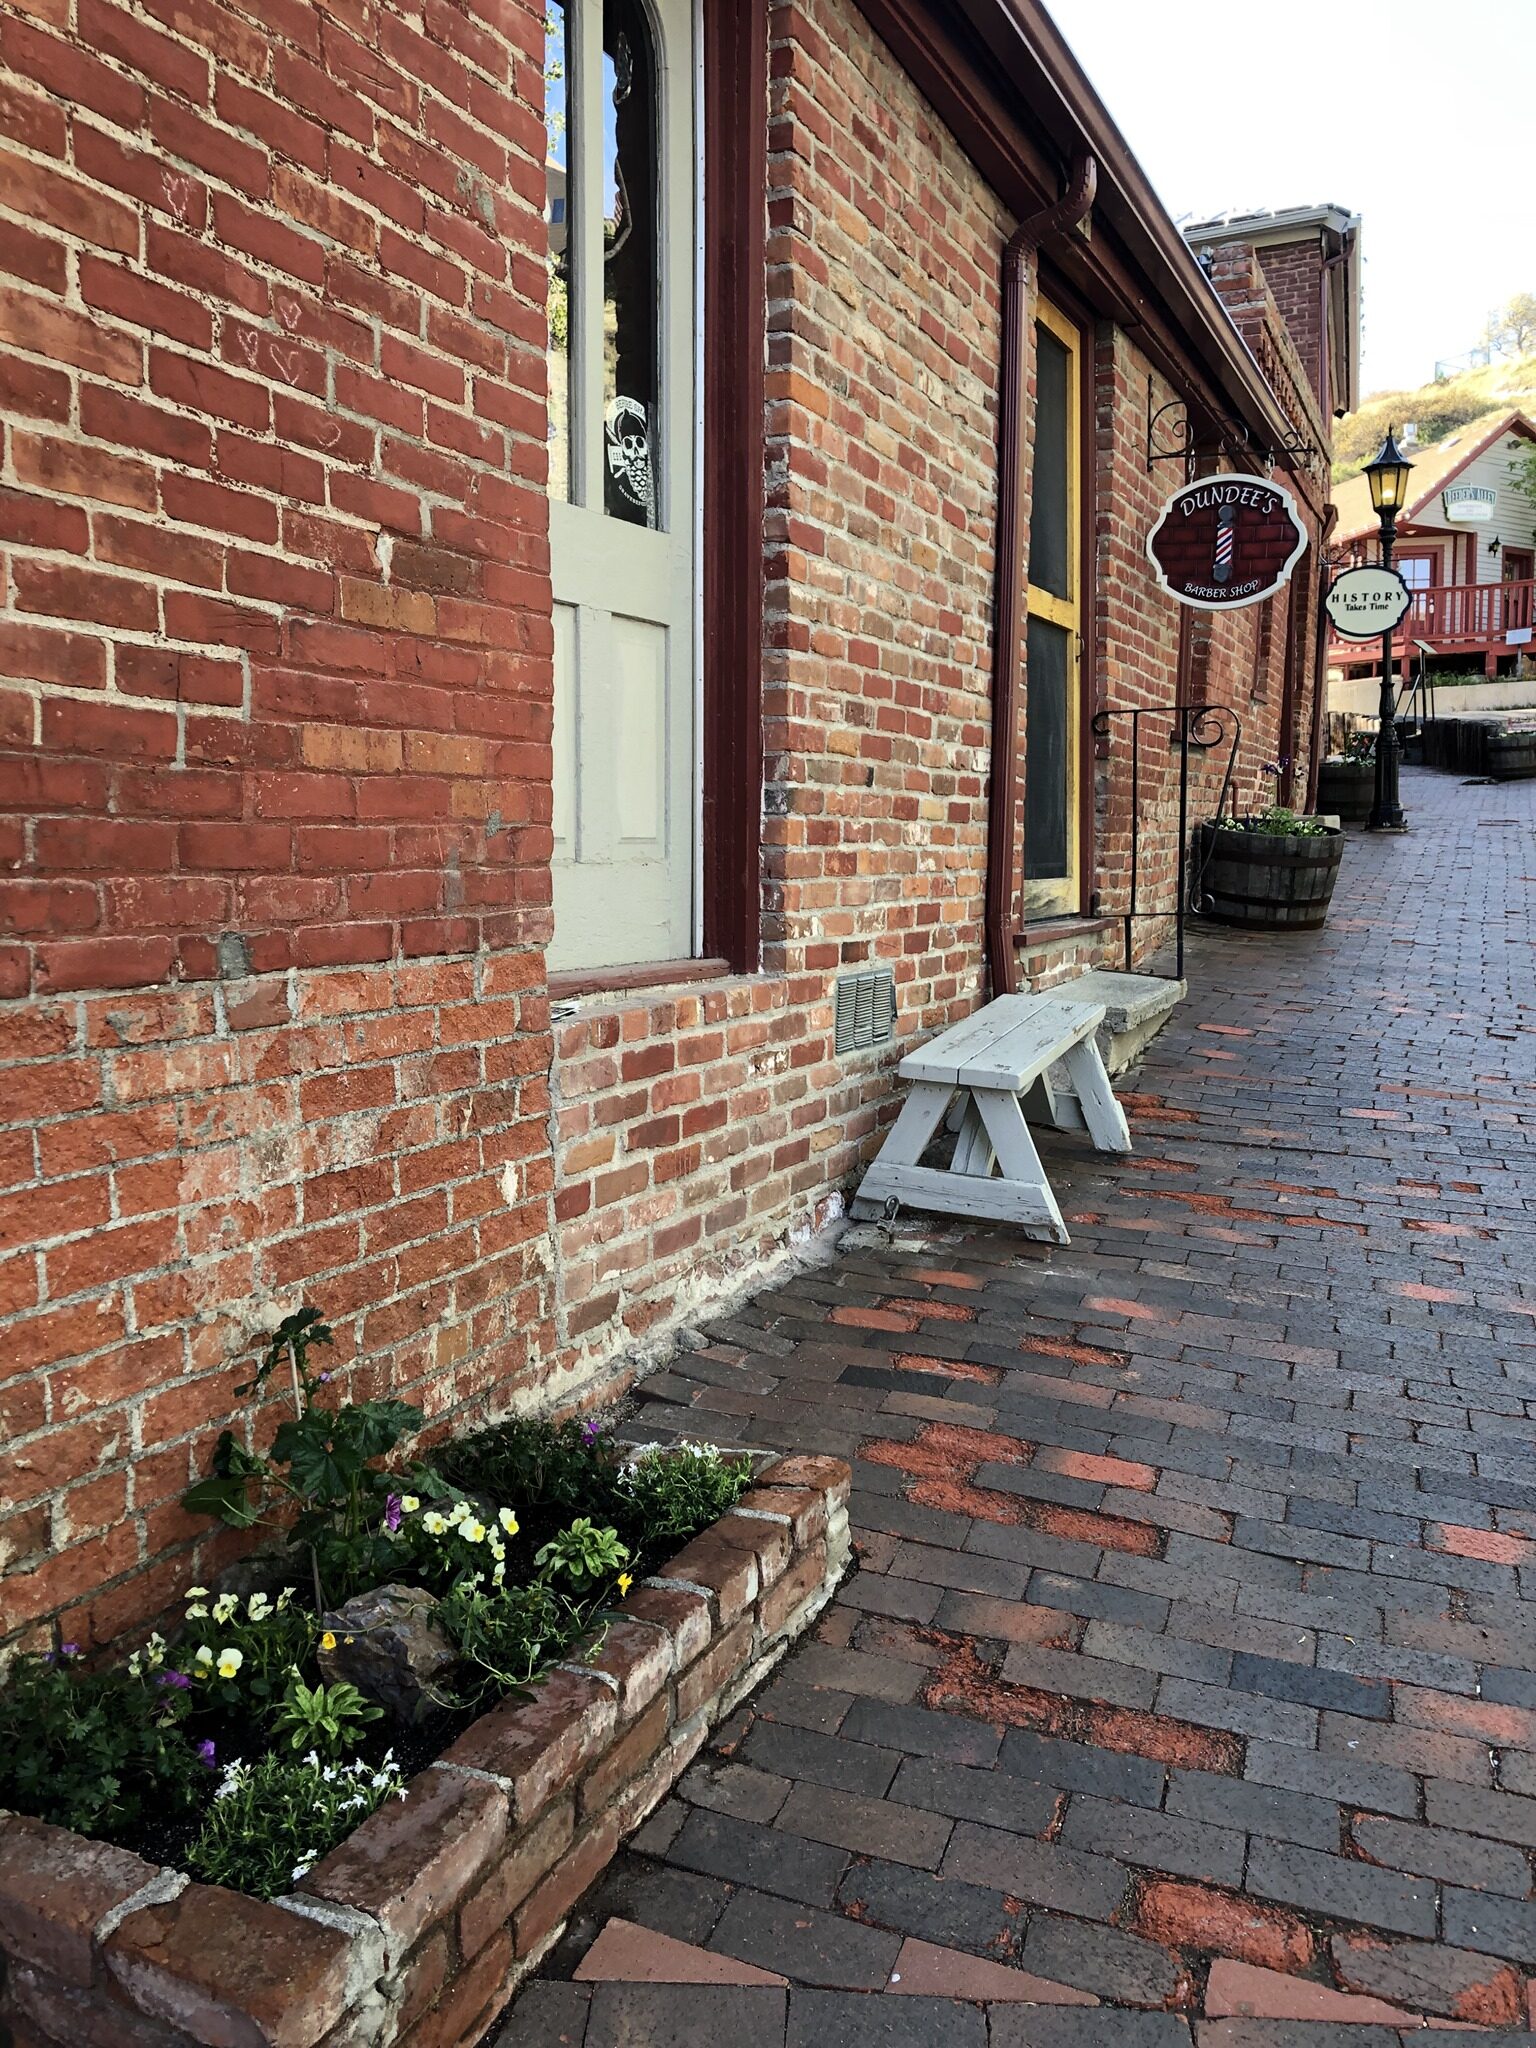 When walking Reeder's Alley, be sure to check out some of the local businesses